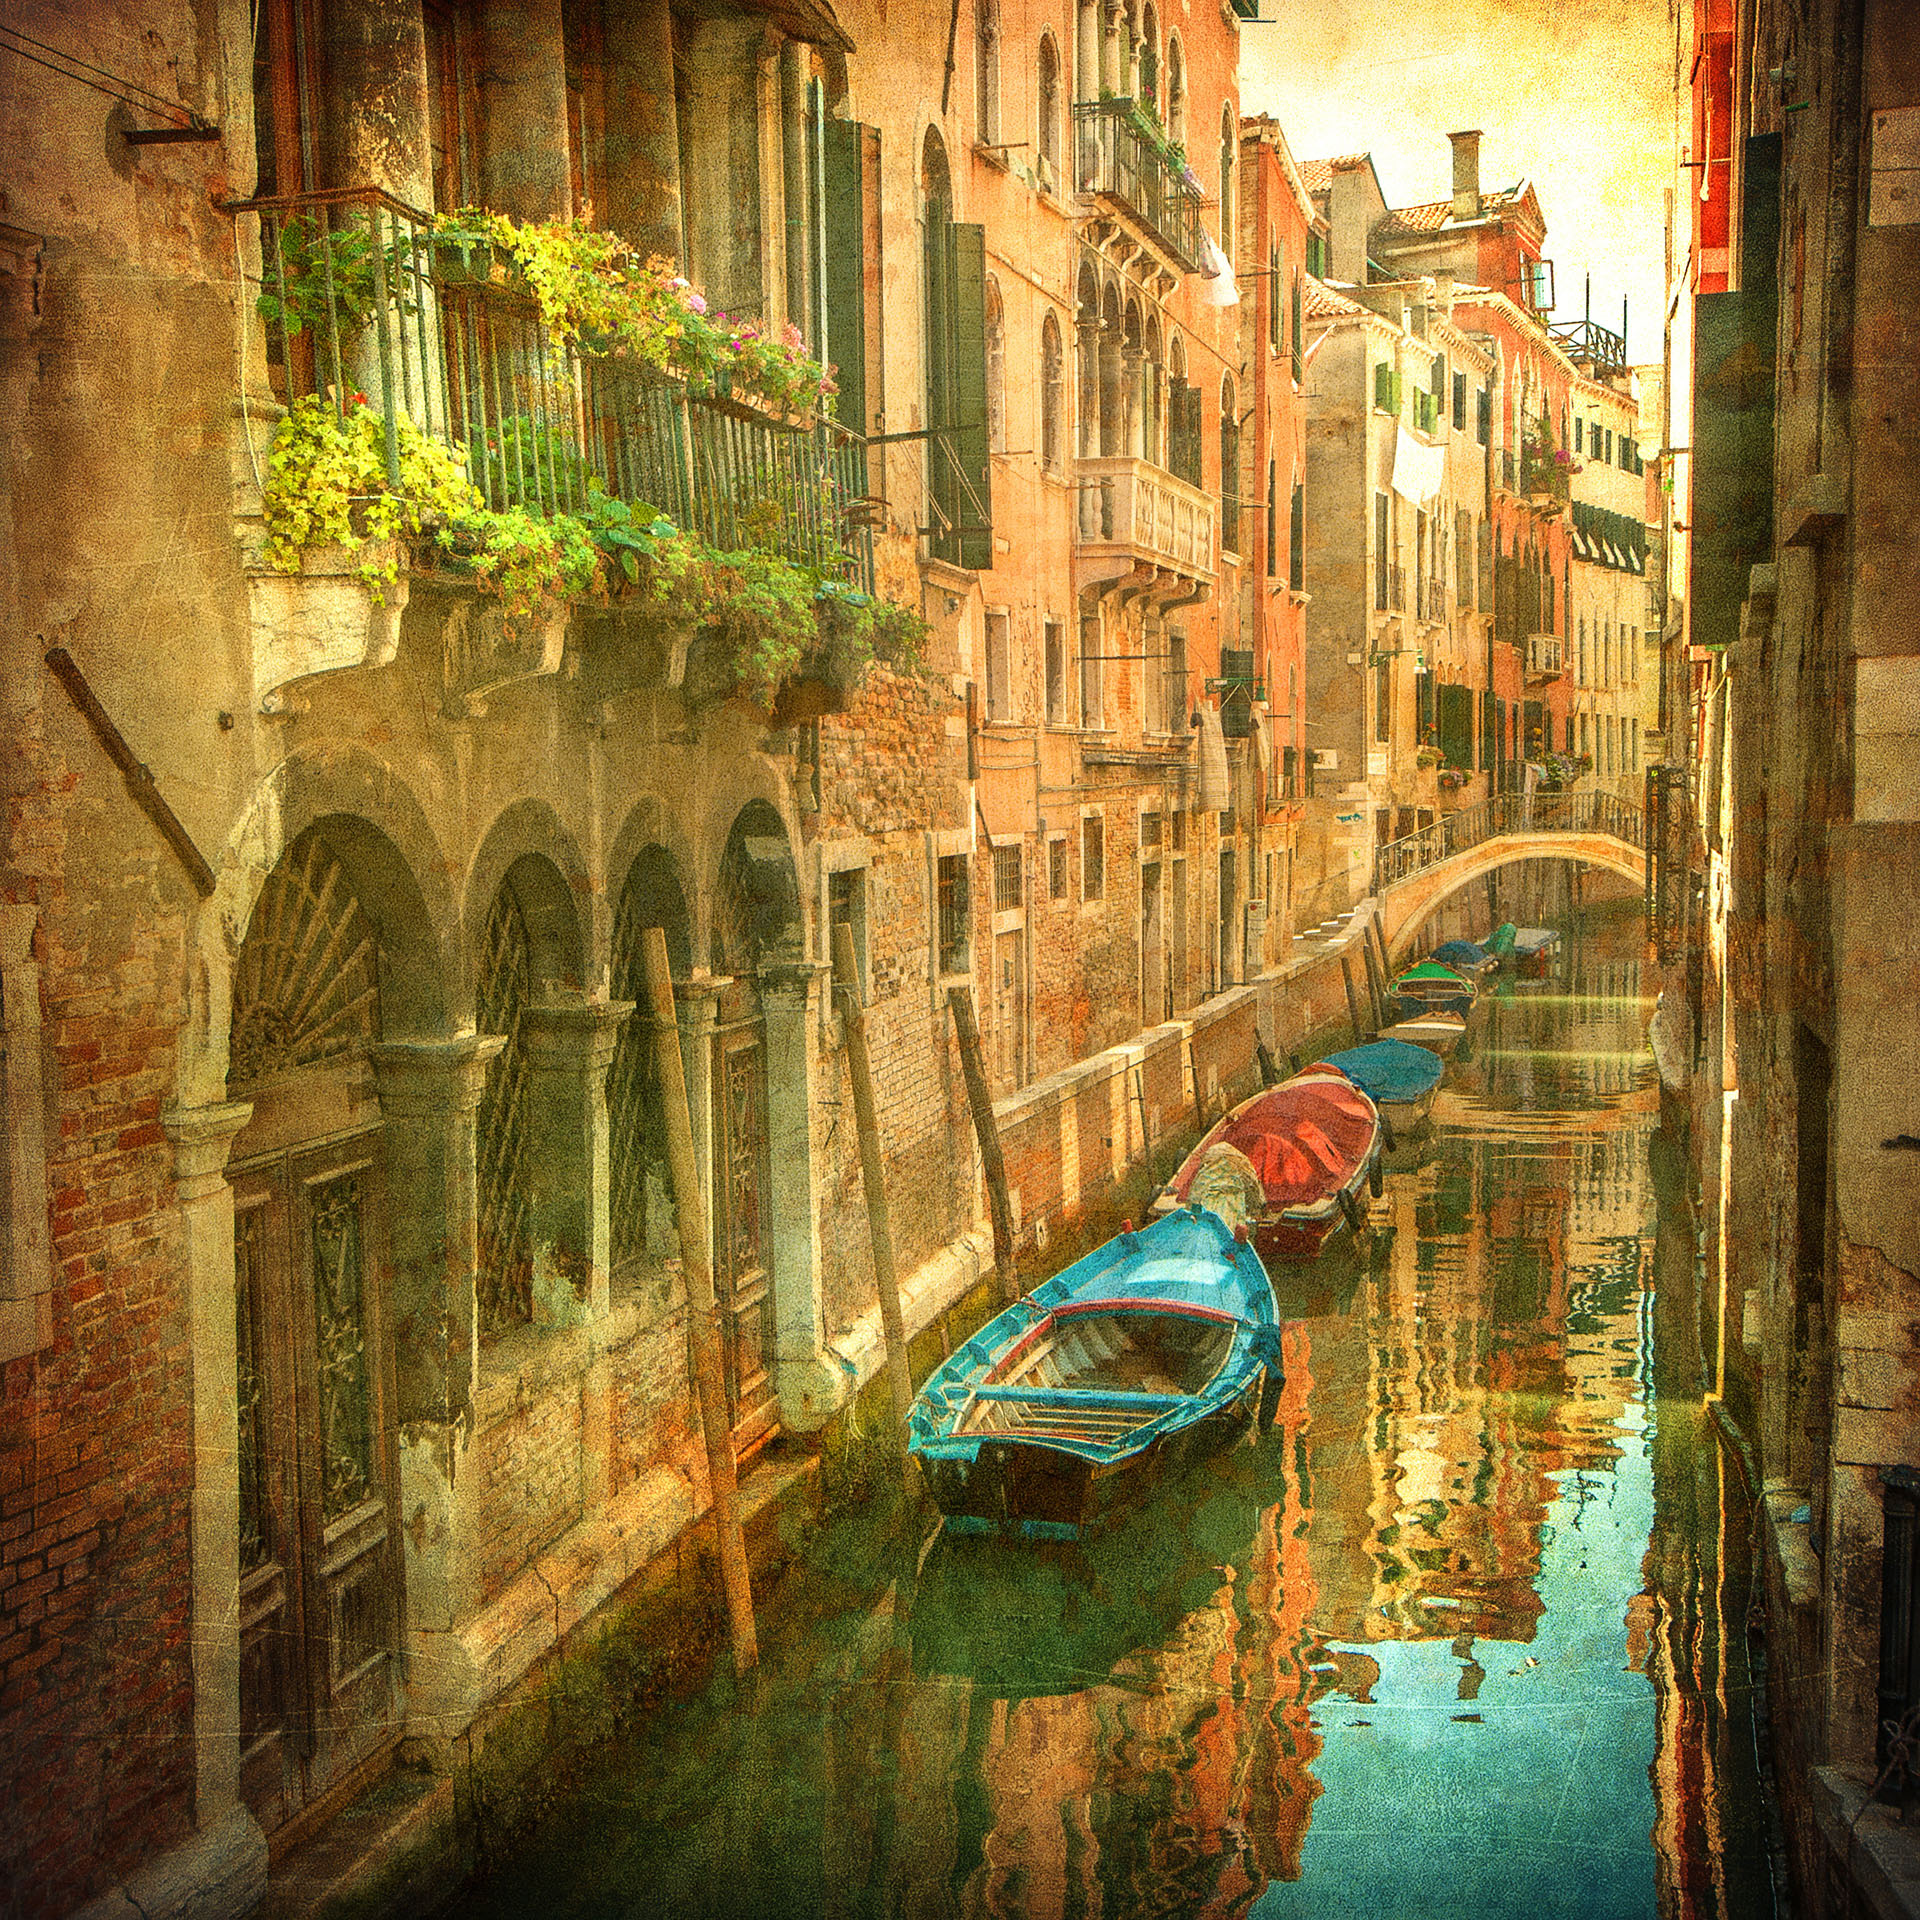 Vintage Venice Canal Italy Photo Wallpaper Wall Mural Cn 156ve